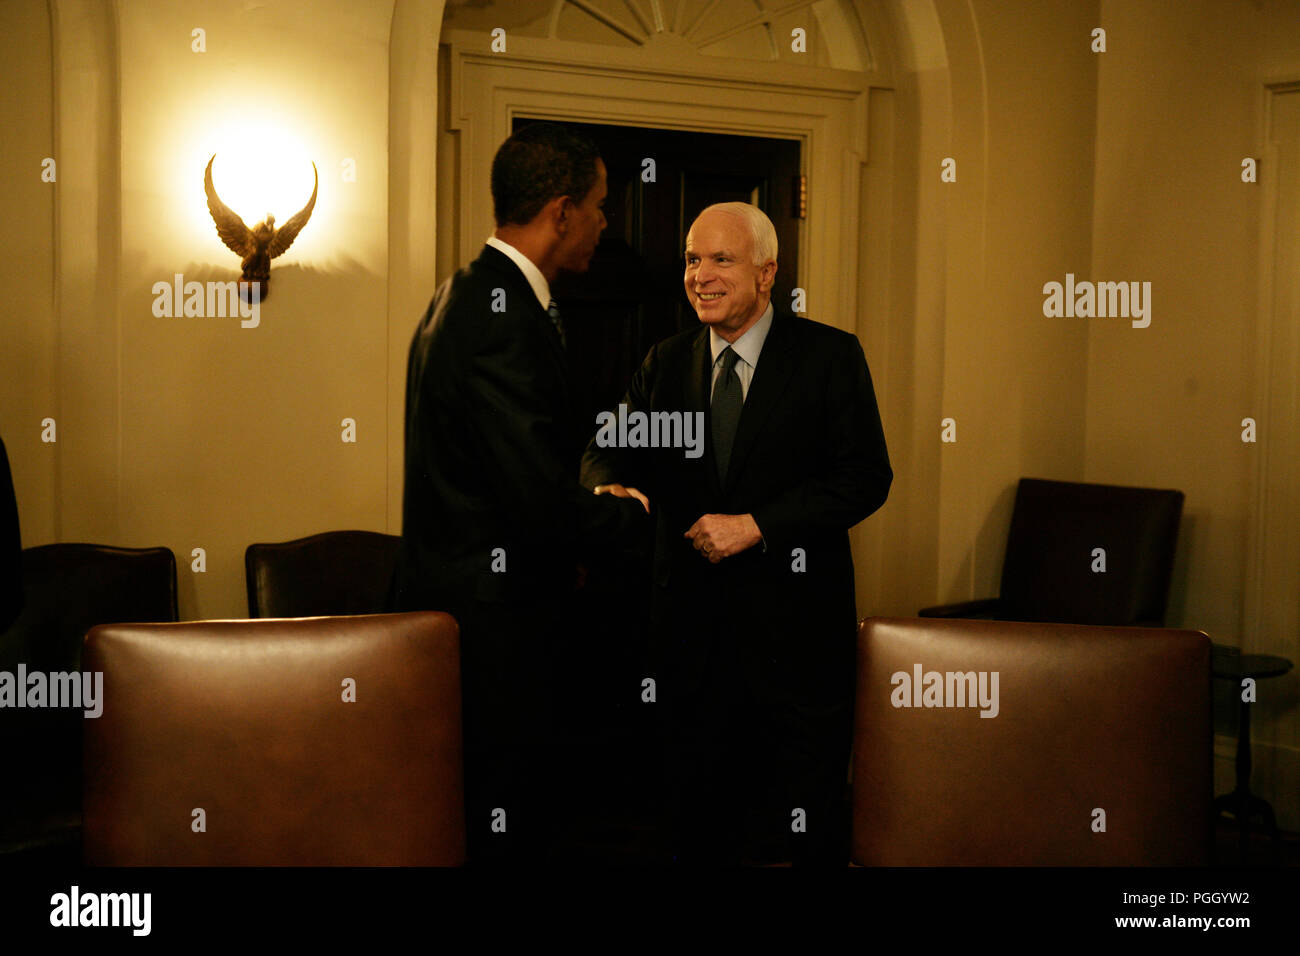 Senators and Presidential Candidates Barack Obama and John McCain arrive at the White House for the meeting with Bicameral and Bipartisan Members of Congress regarding the current economic crisis. Stock Photo